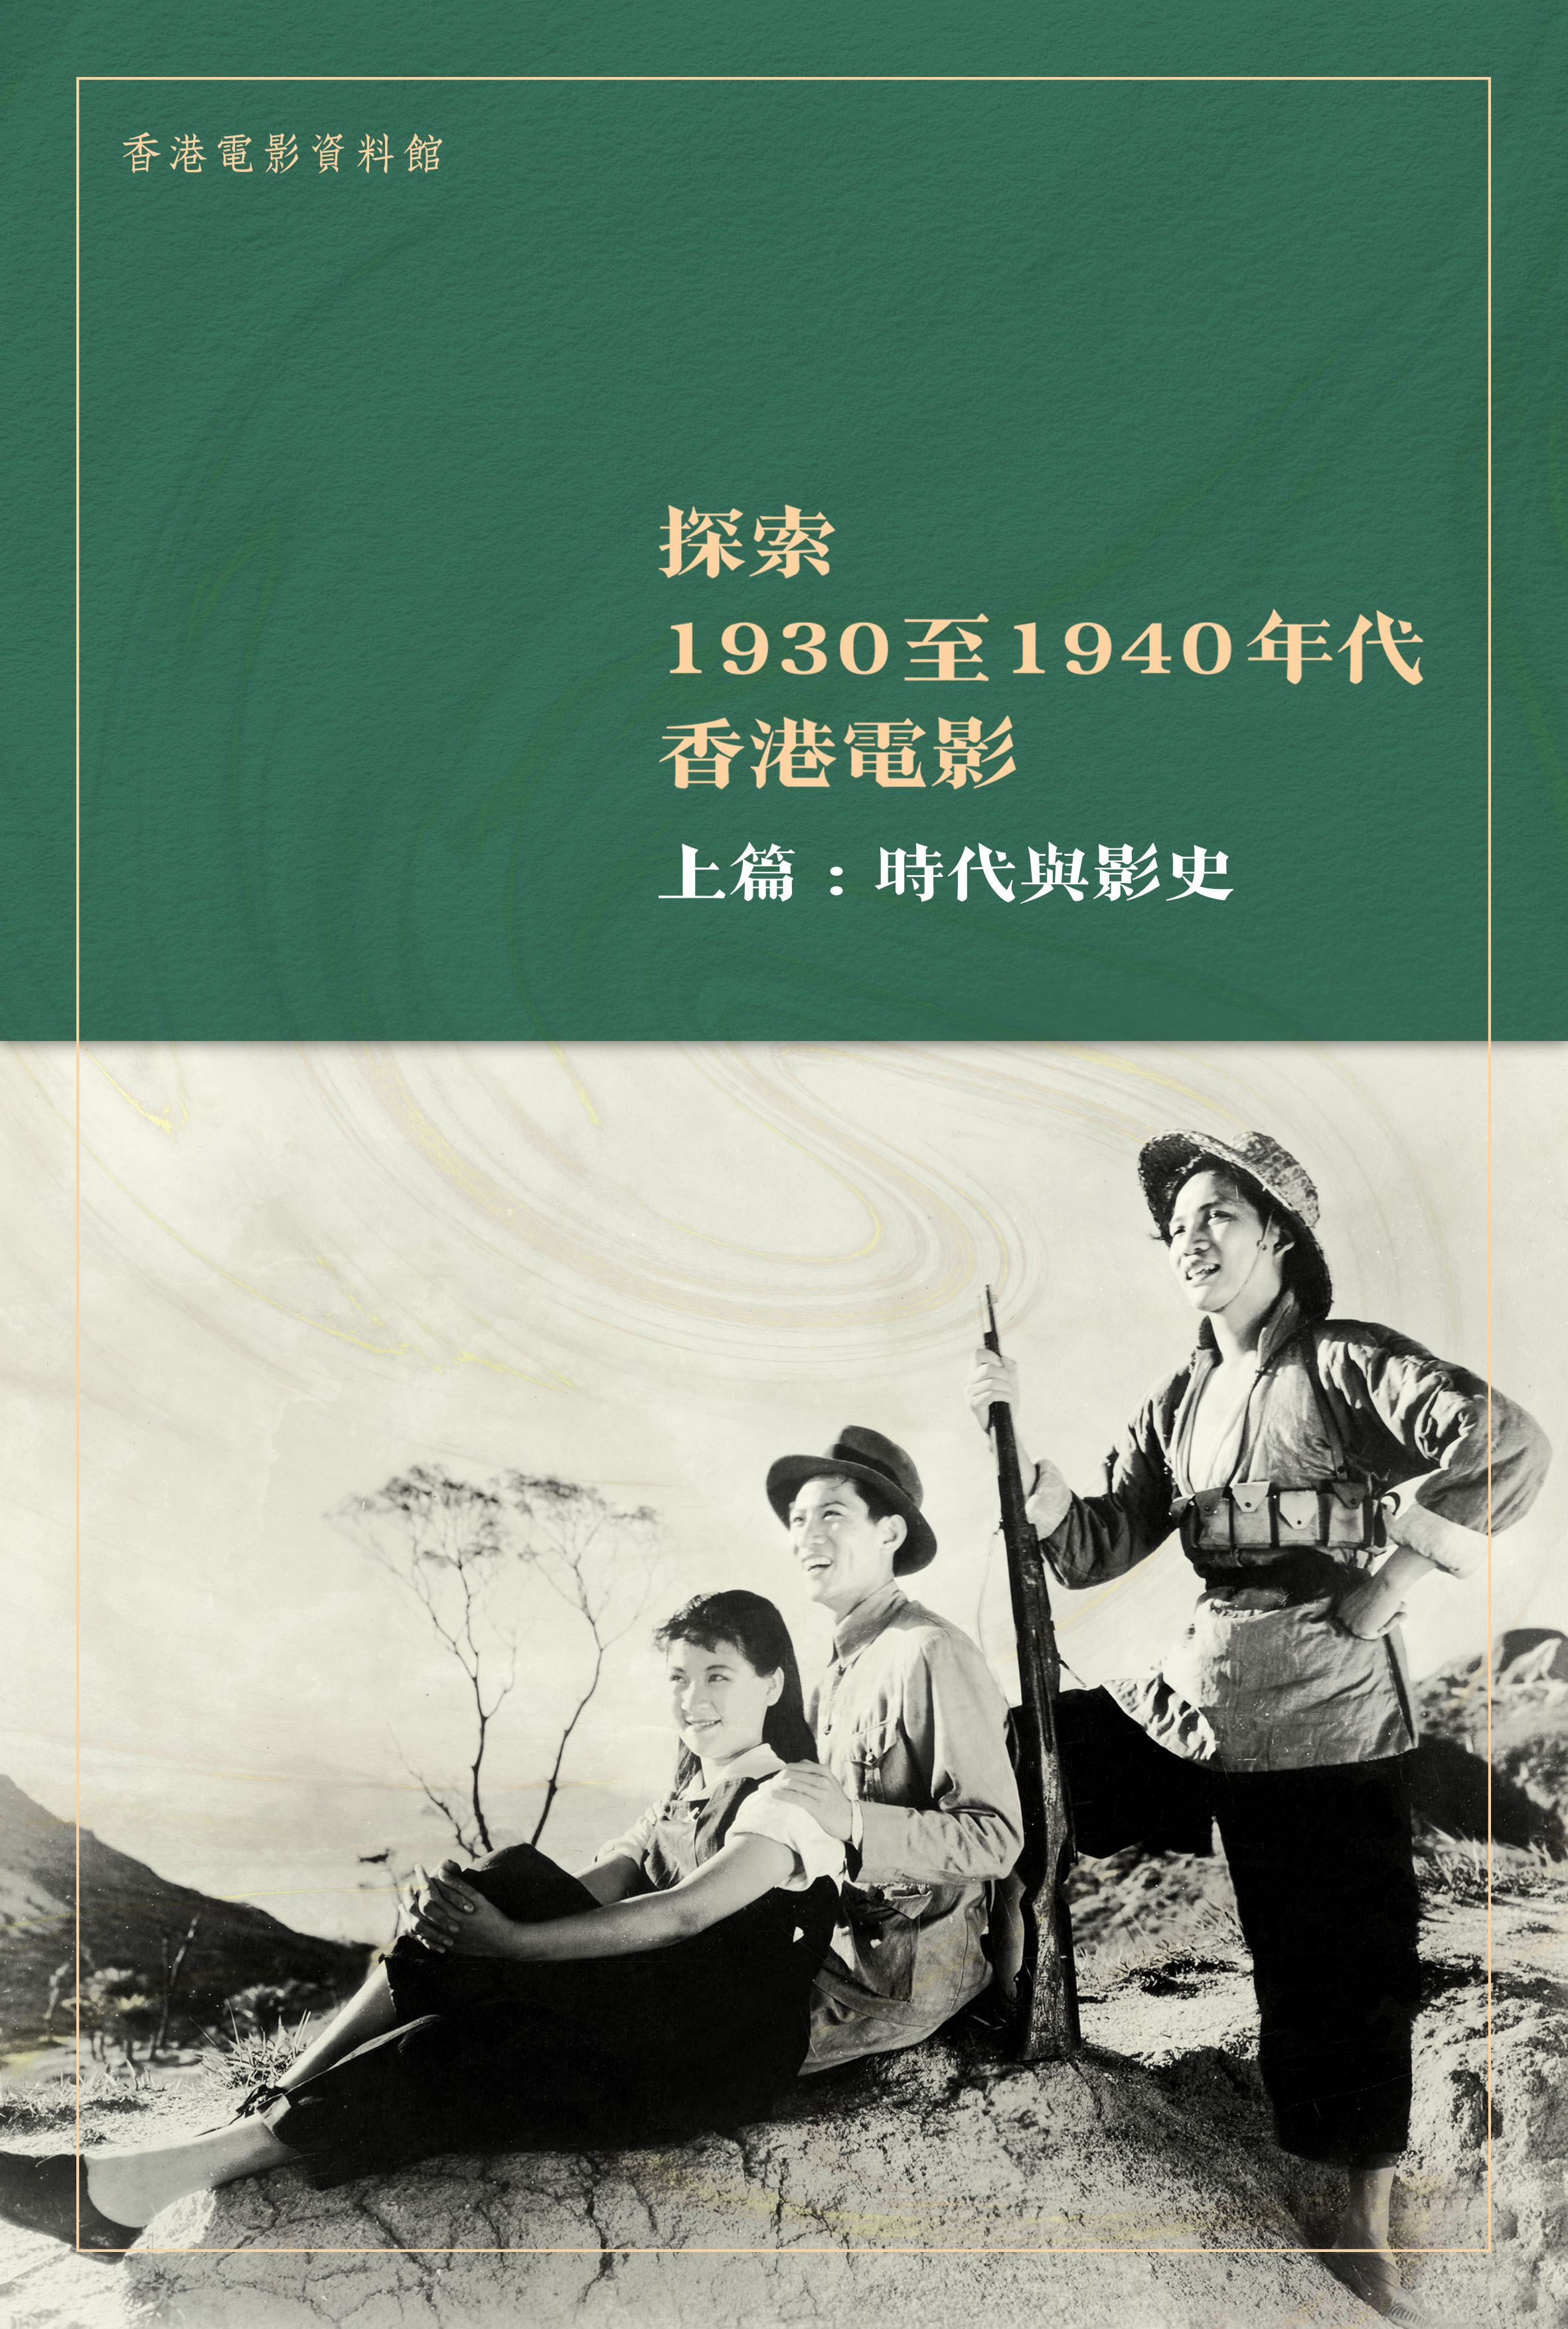 Exploring Hong Kong Films of the 1930s and 1940s　Part 1: Era and Film History (Chinese edition)